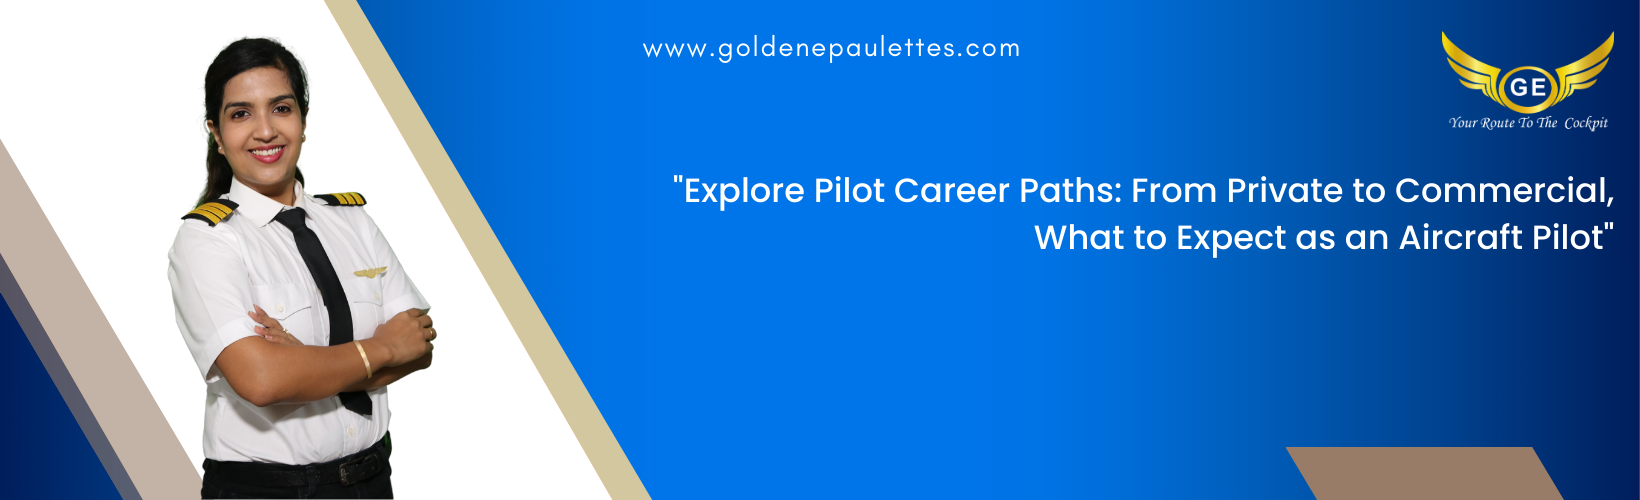 Career Paths for Aircraft Pilots